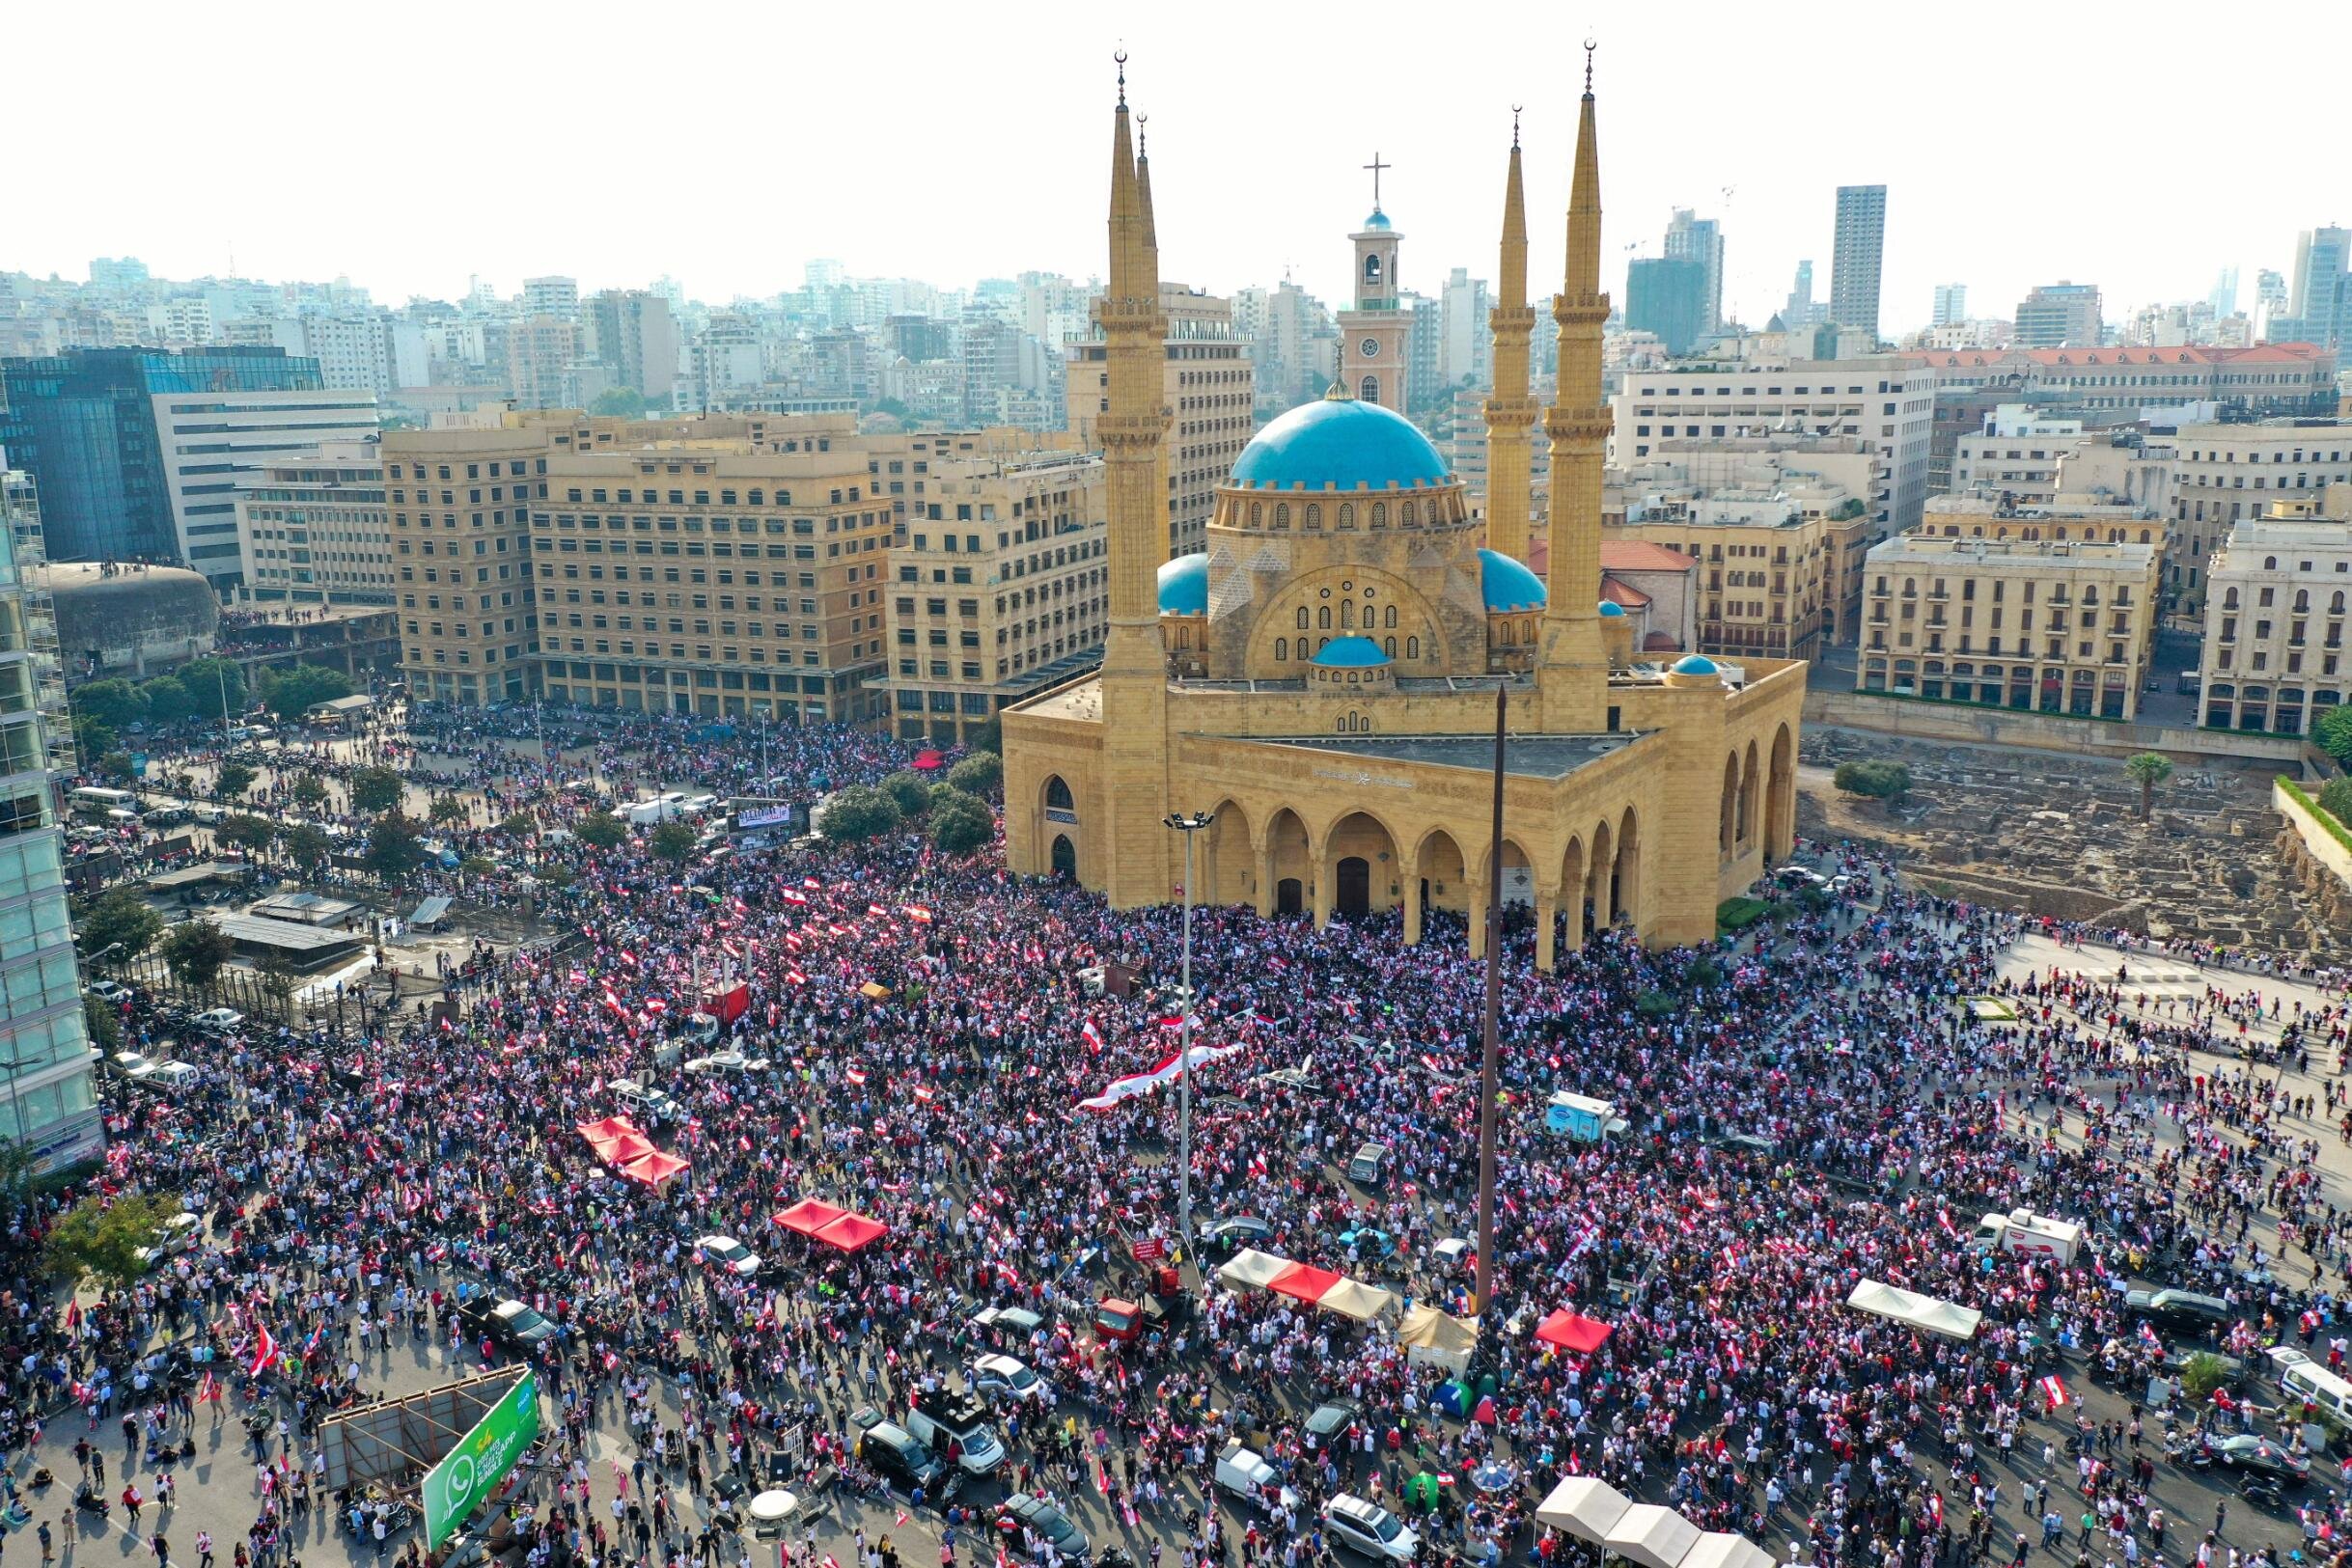 Lebanese protesters rally in central Beirut during demonstrations against tax increases and official corruption.